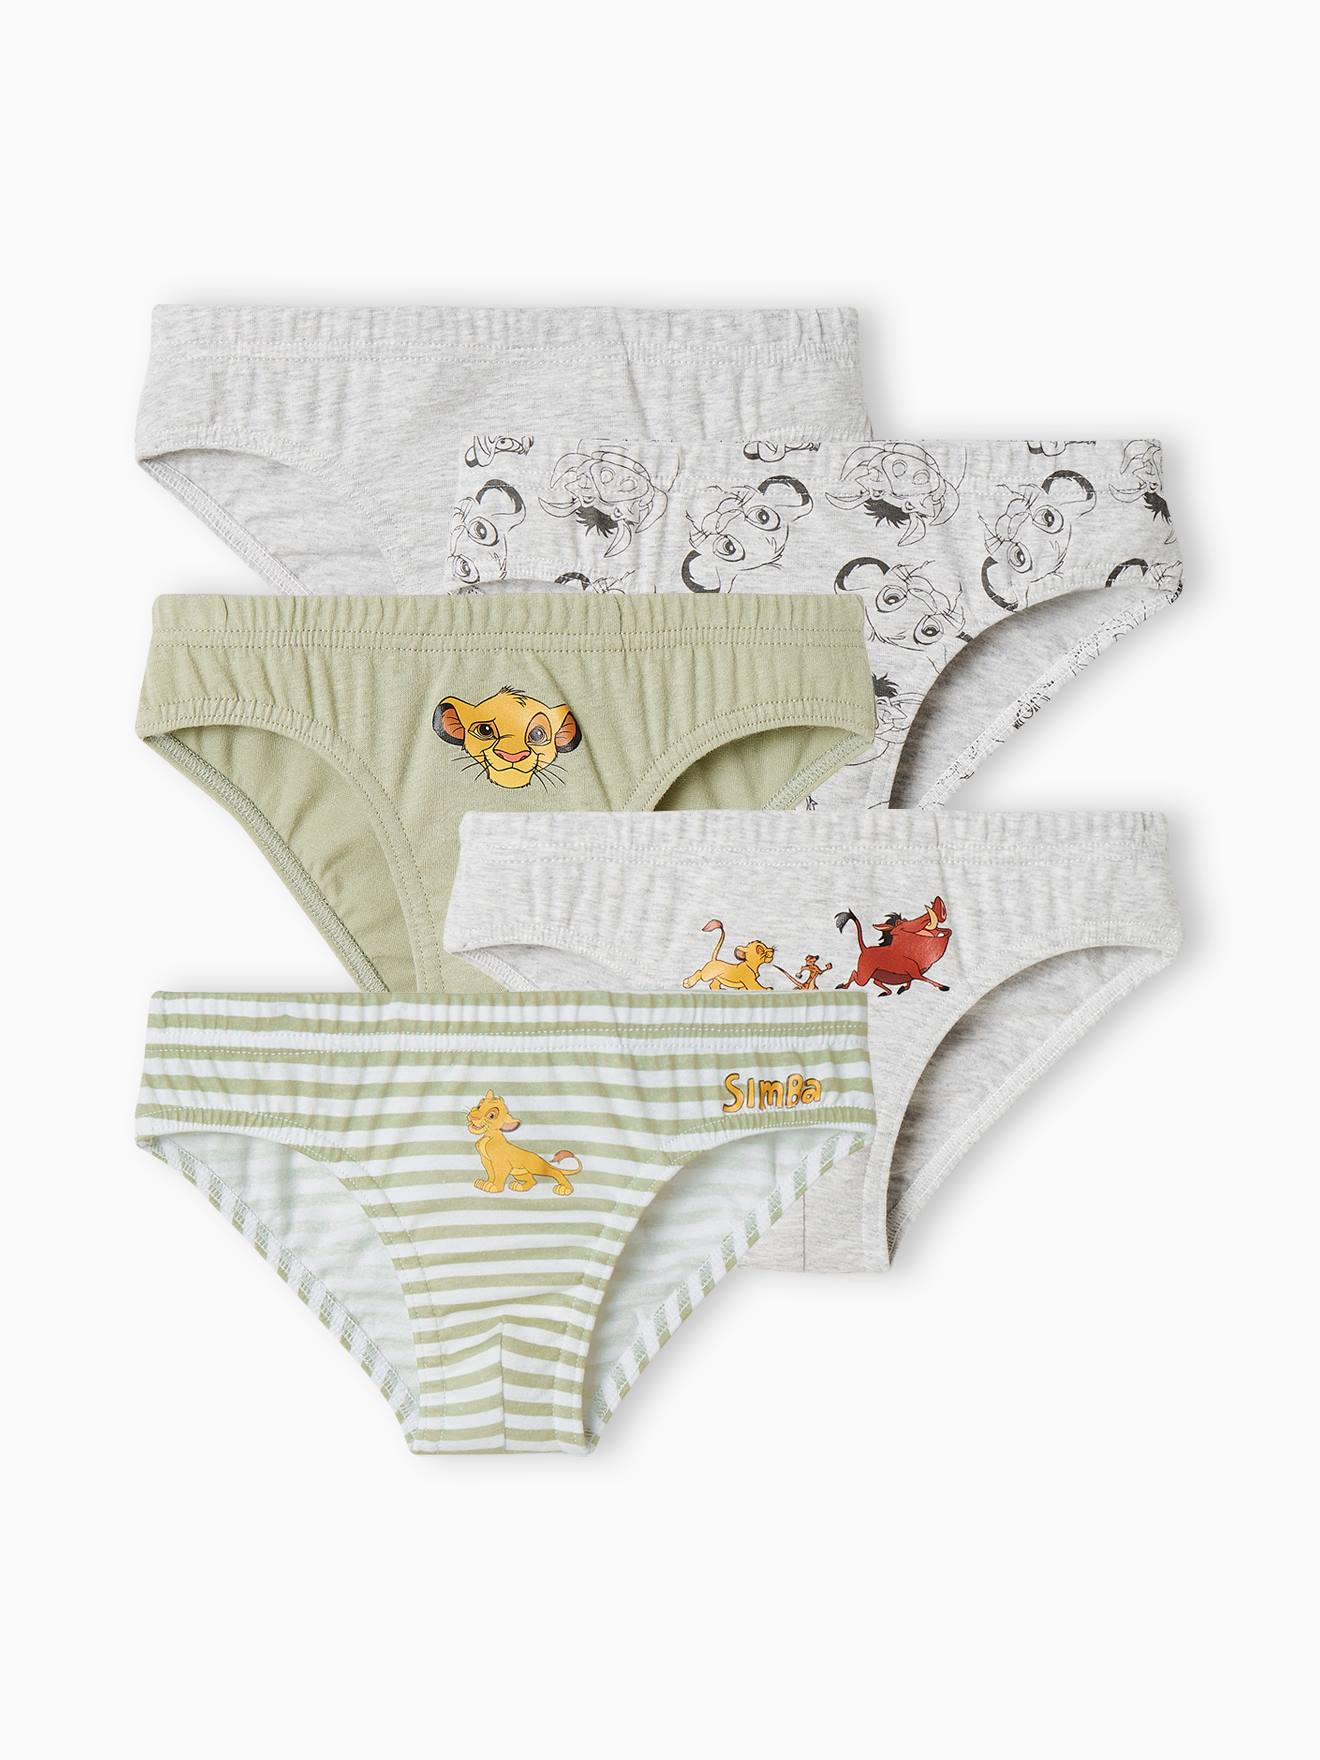 5 Pack Pure Cotton Lion king™ Briefs (18 Months - 12 Years)